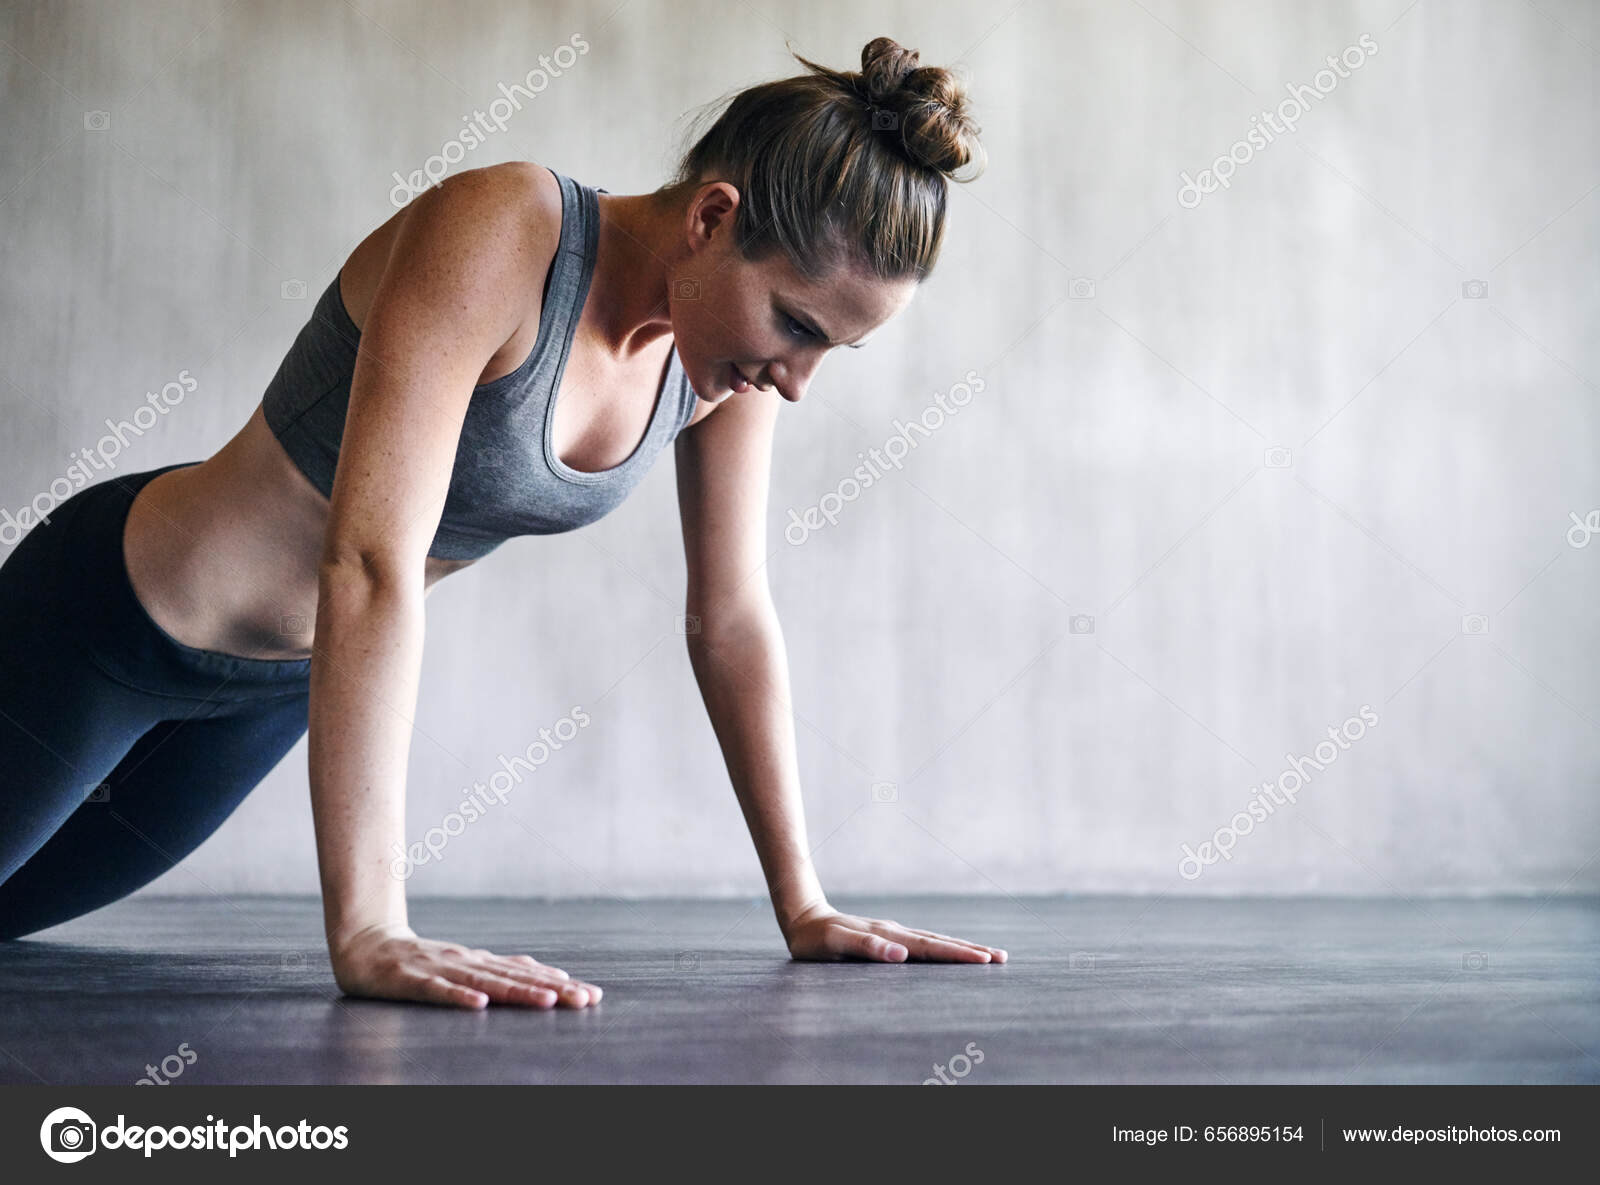 Woman healthy lifestyle to do exercise Royalty Free Vector